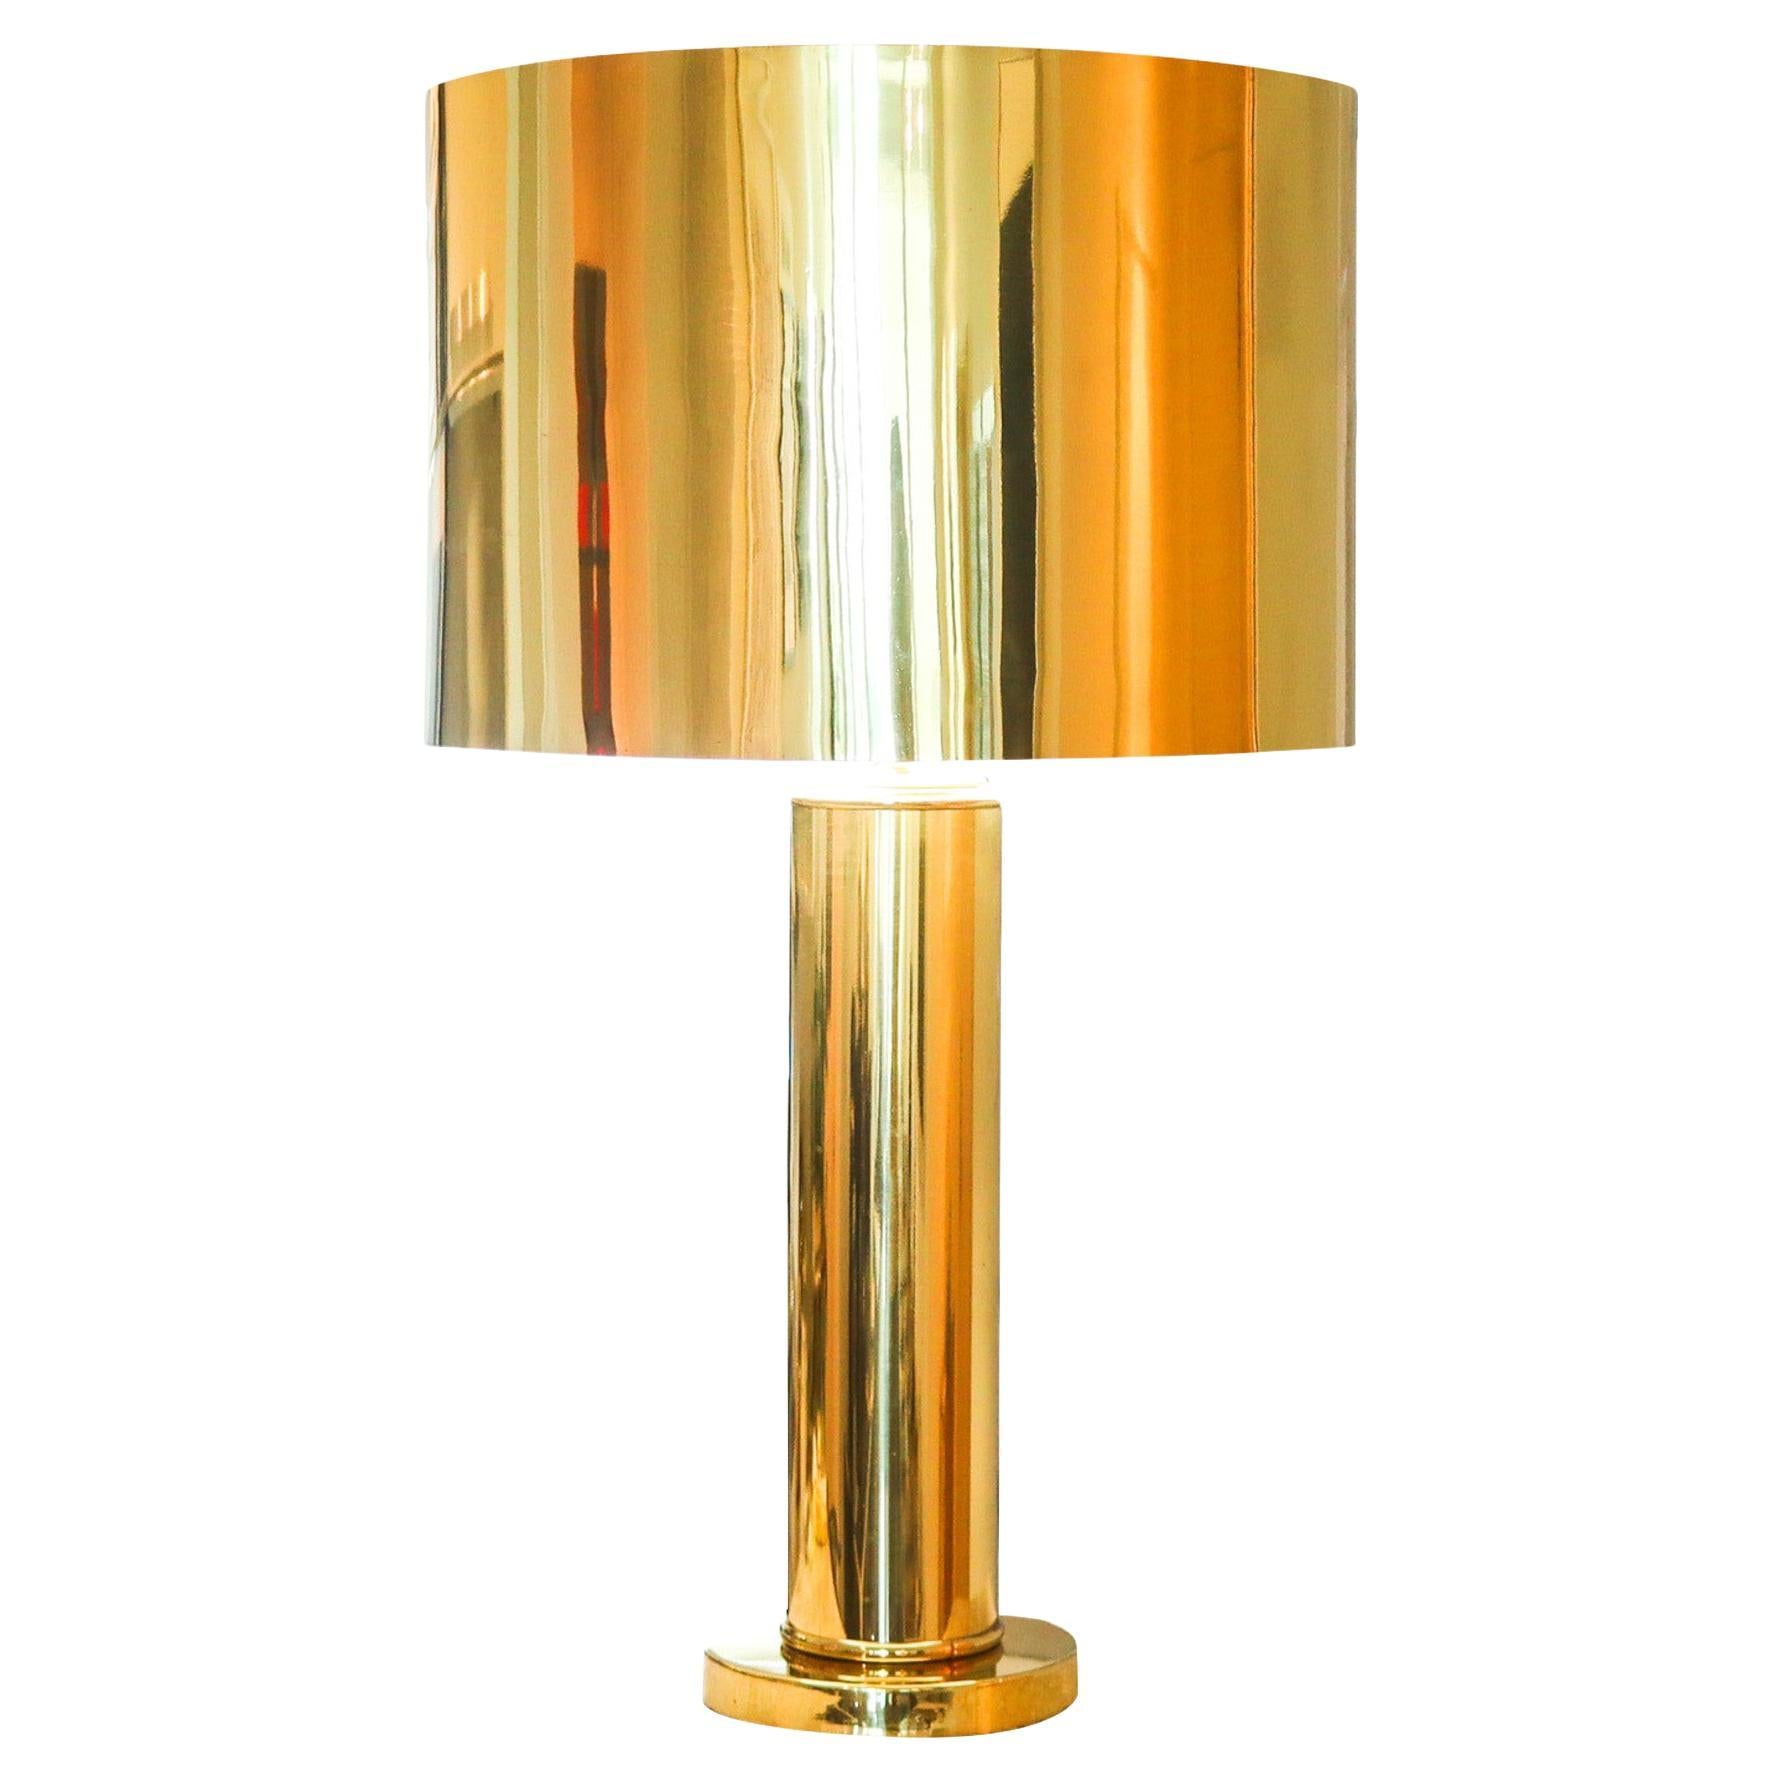 George Kovacs 1960 Mid Century Modern Large Desk-Table Lamp In Polished Brass For Sale